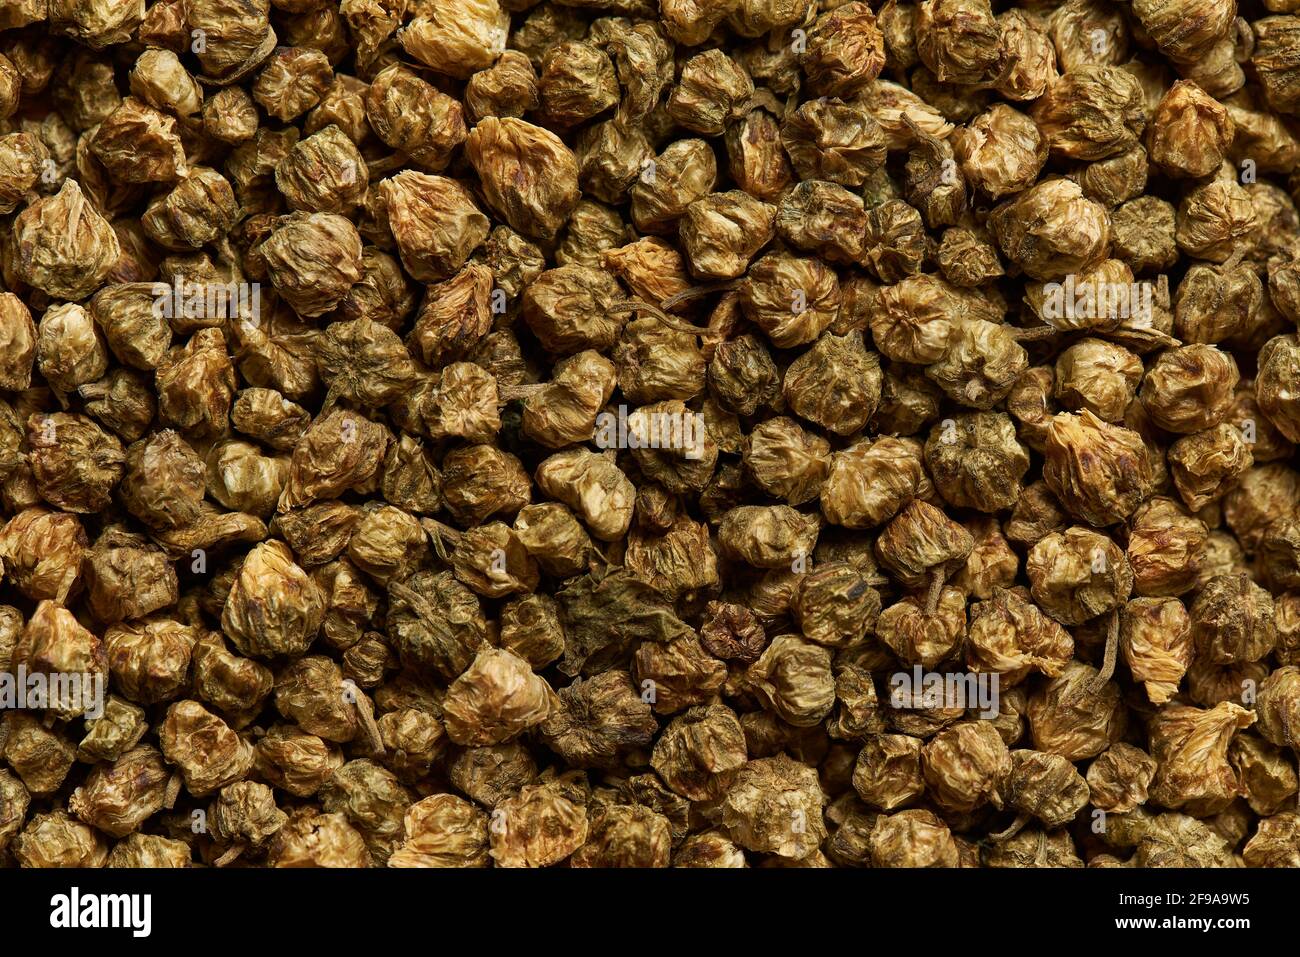 Dried chrysanthemum flowers as a background. Stock Photo